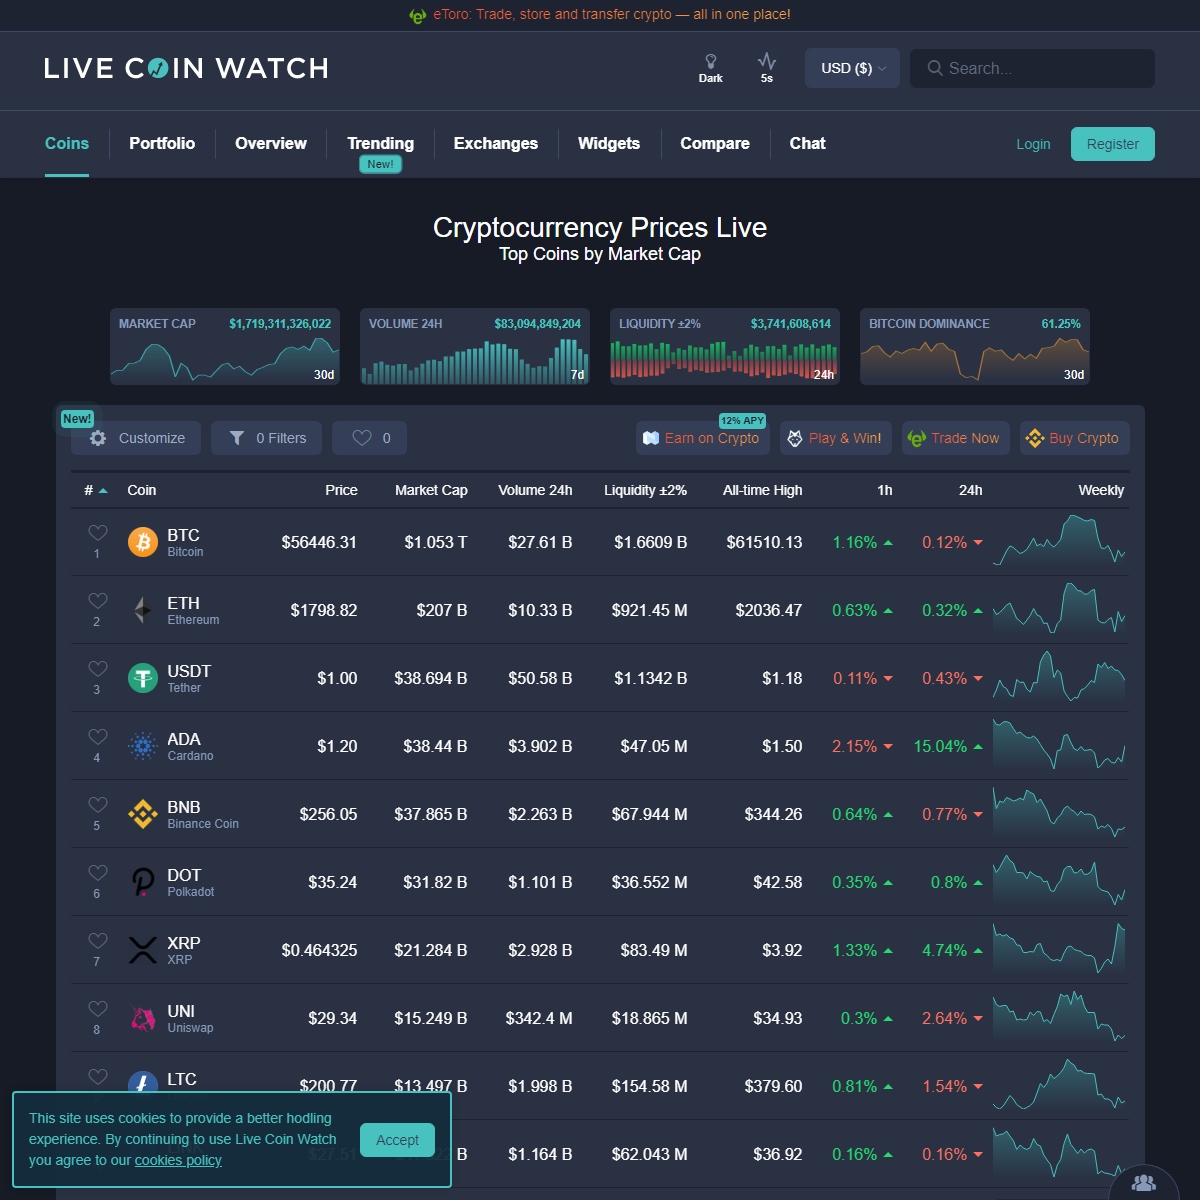 A complete backup of https://www.livecoinwatch.com/